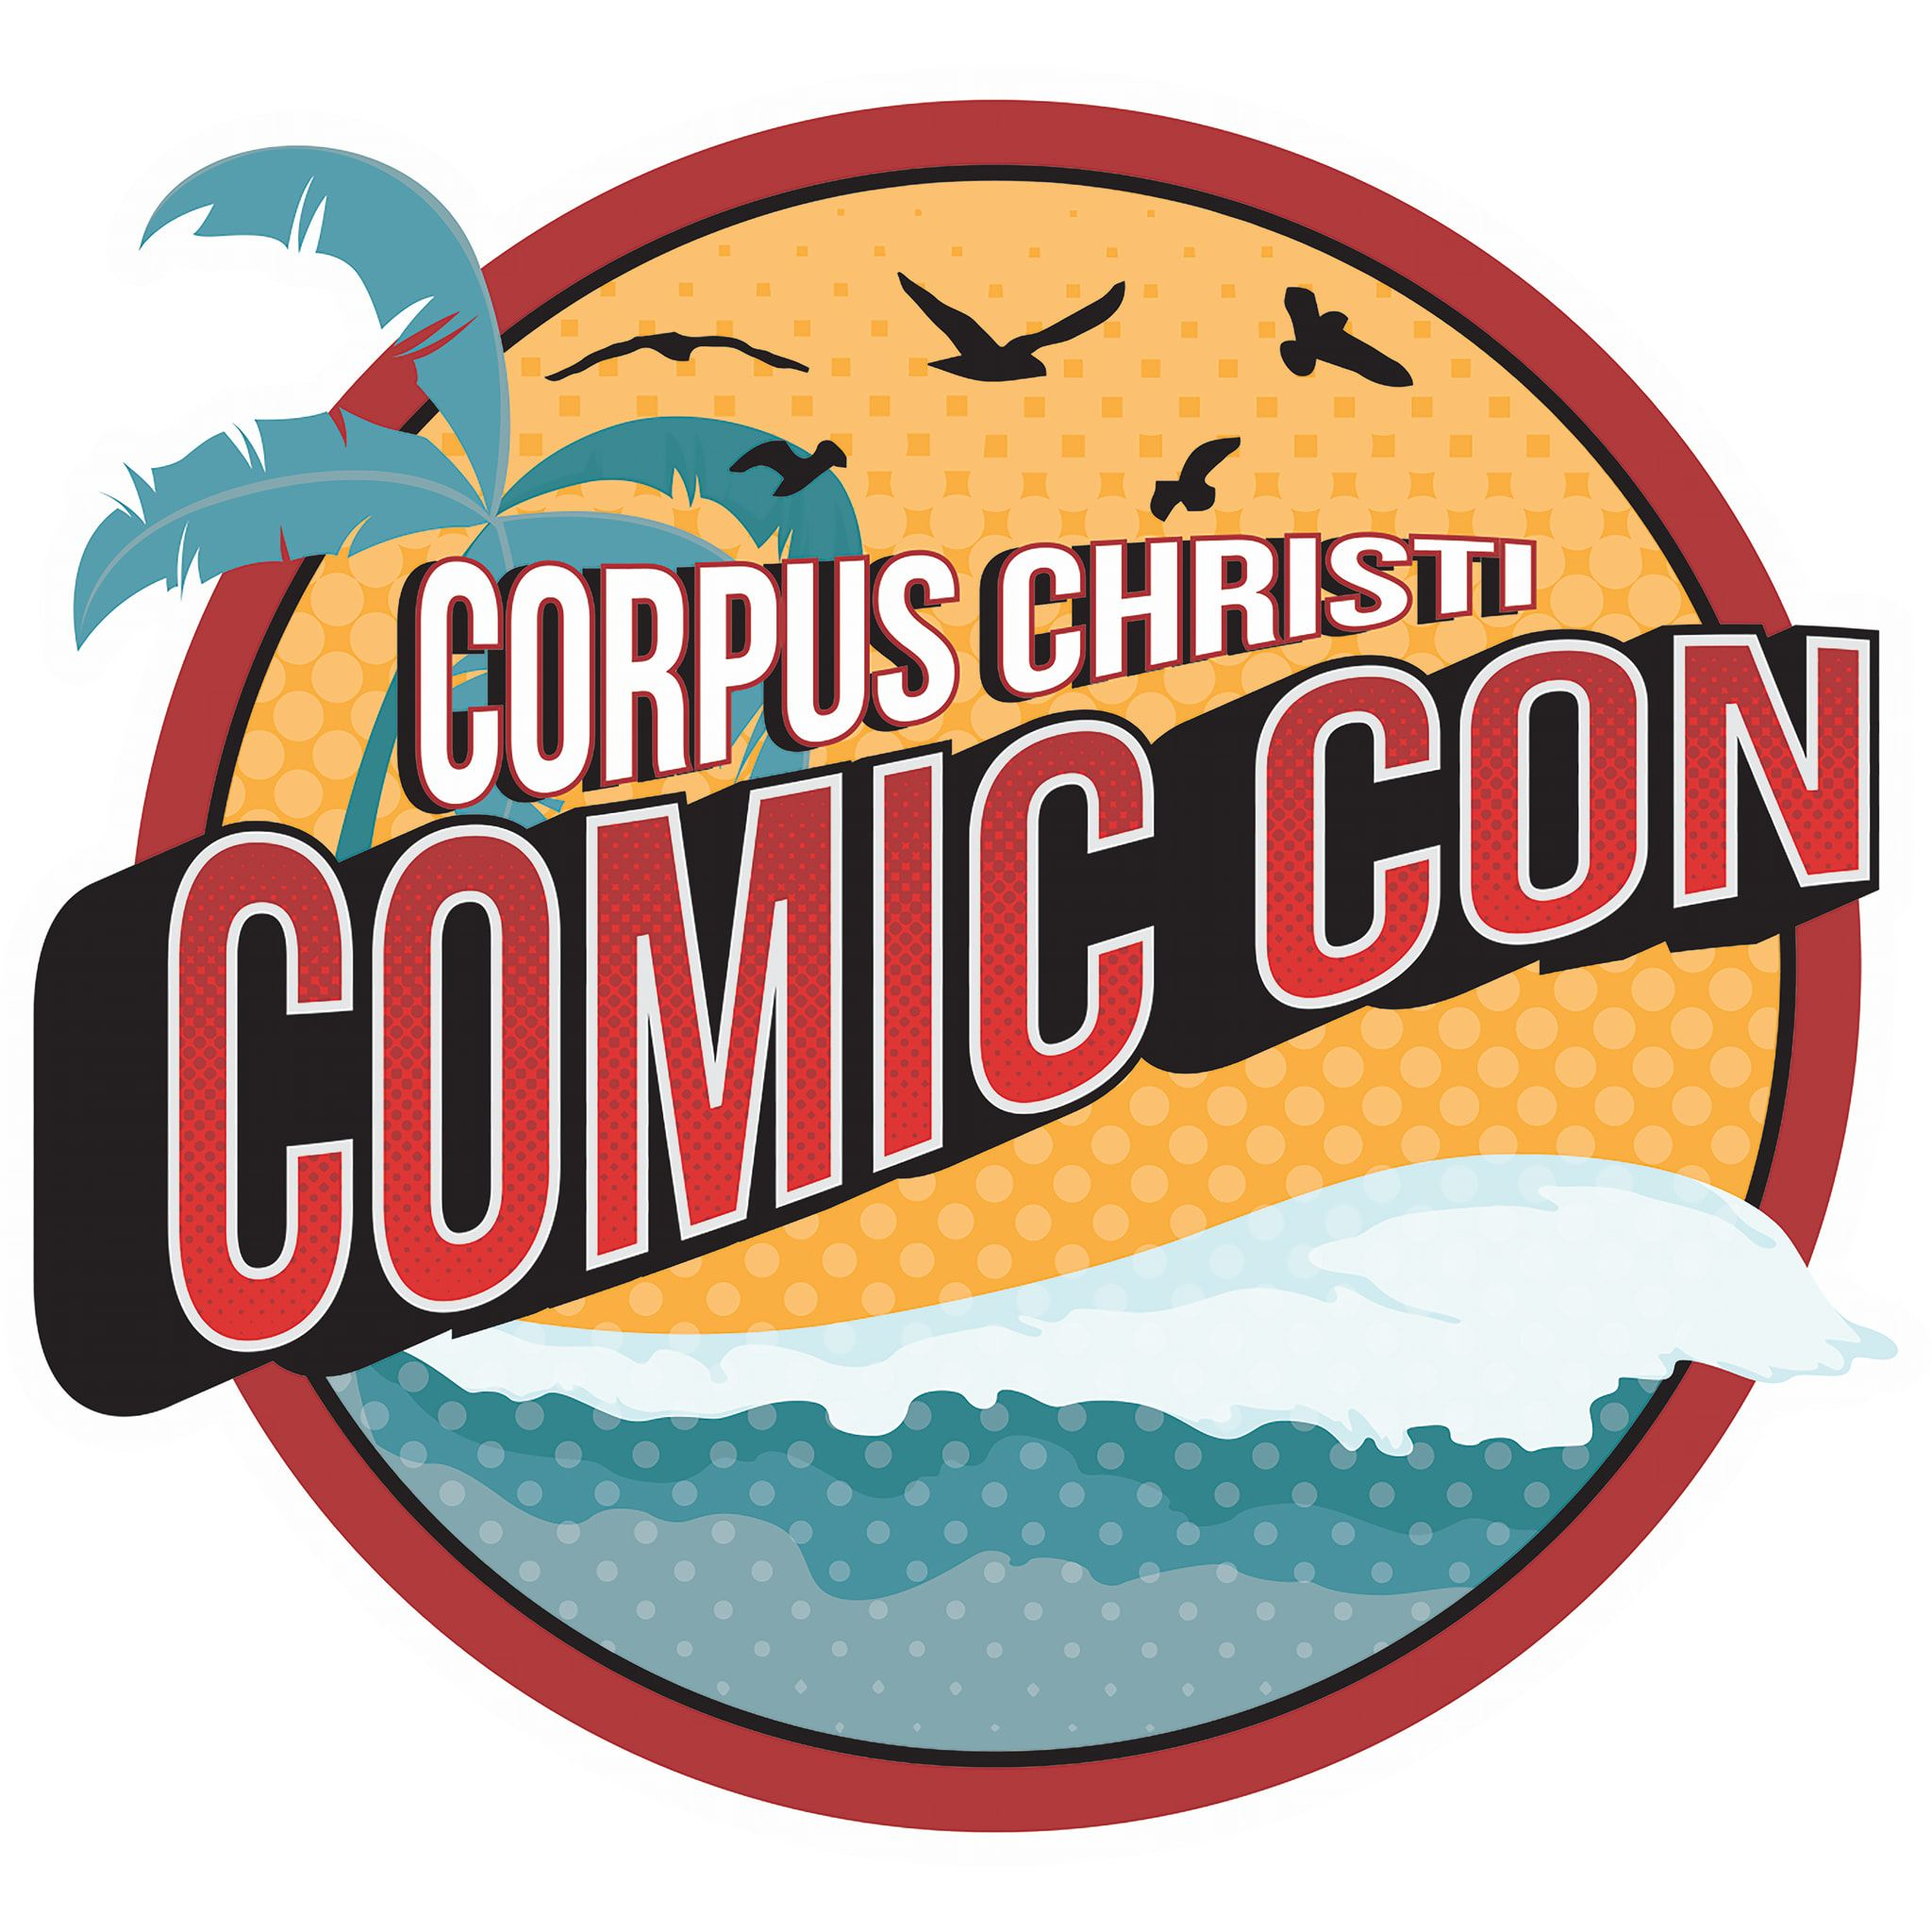 Here's your guide to the 2022 Corpus Christi Comic Con